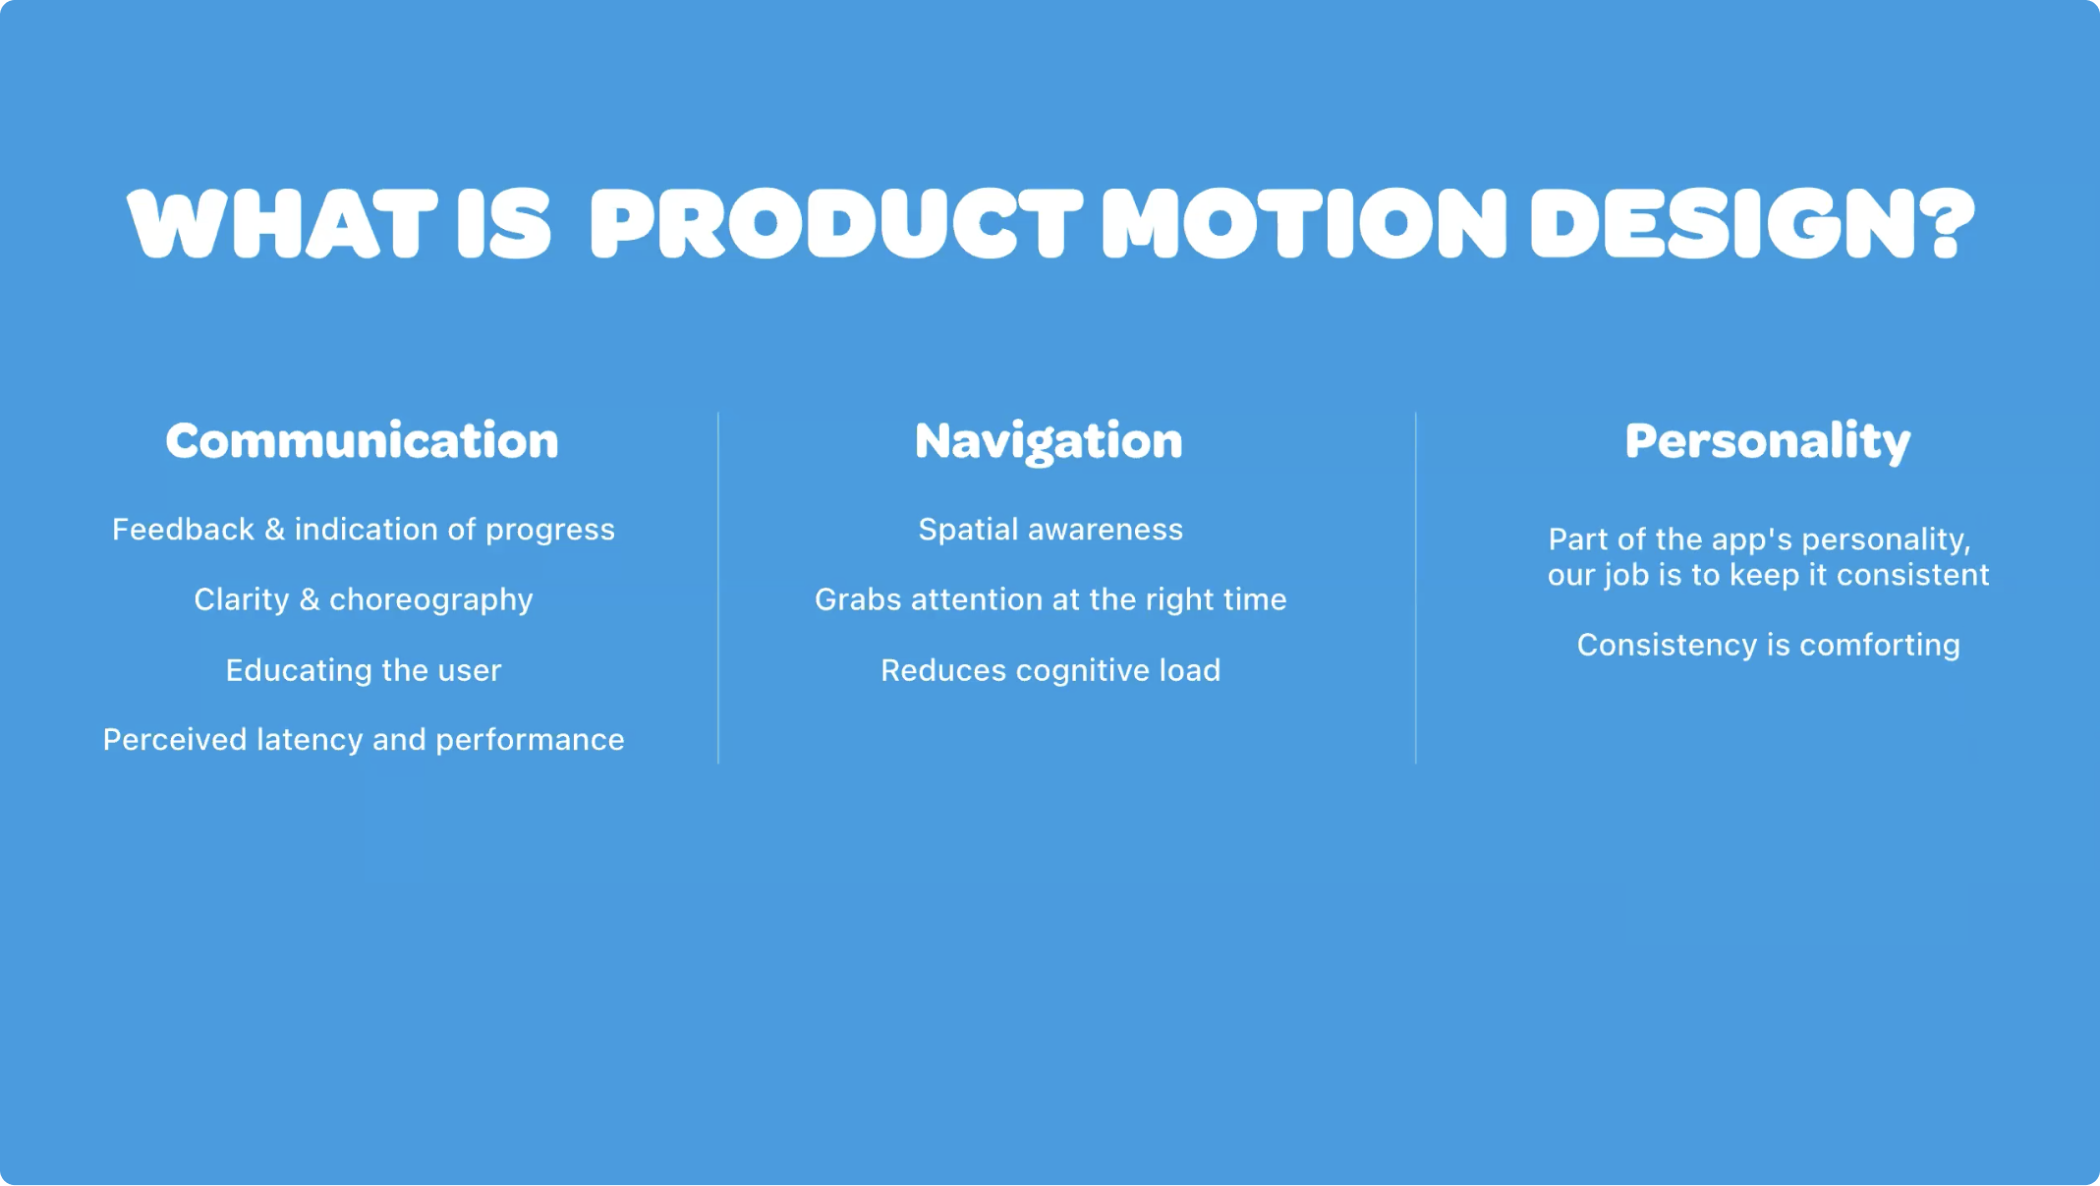 The definition of product motion design according to Wolt designers.